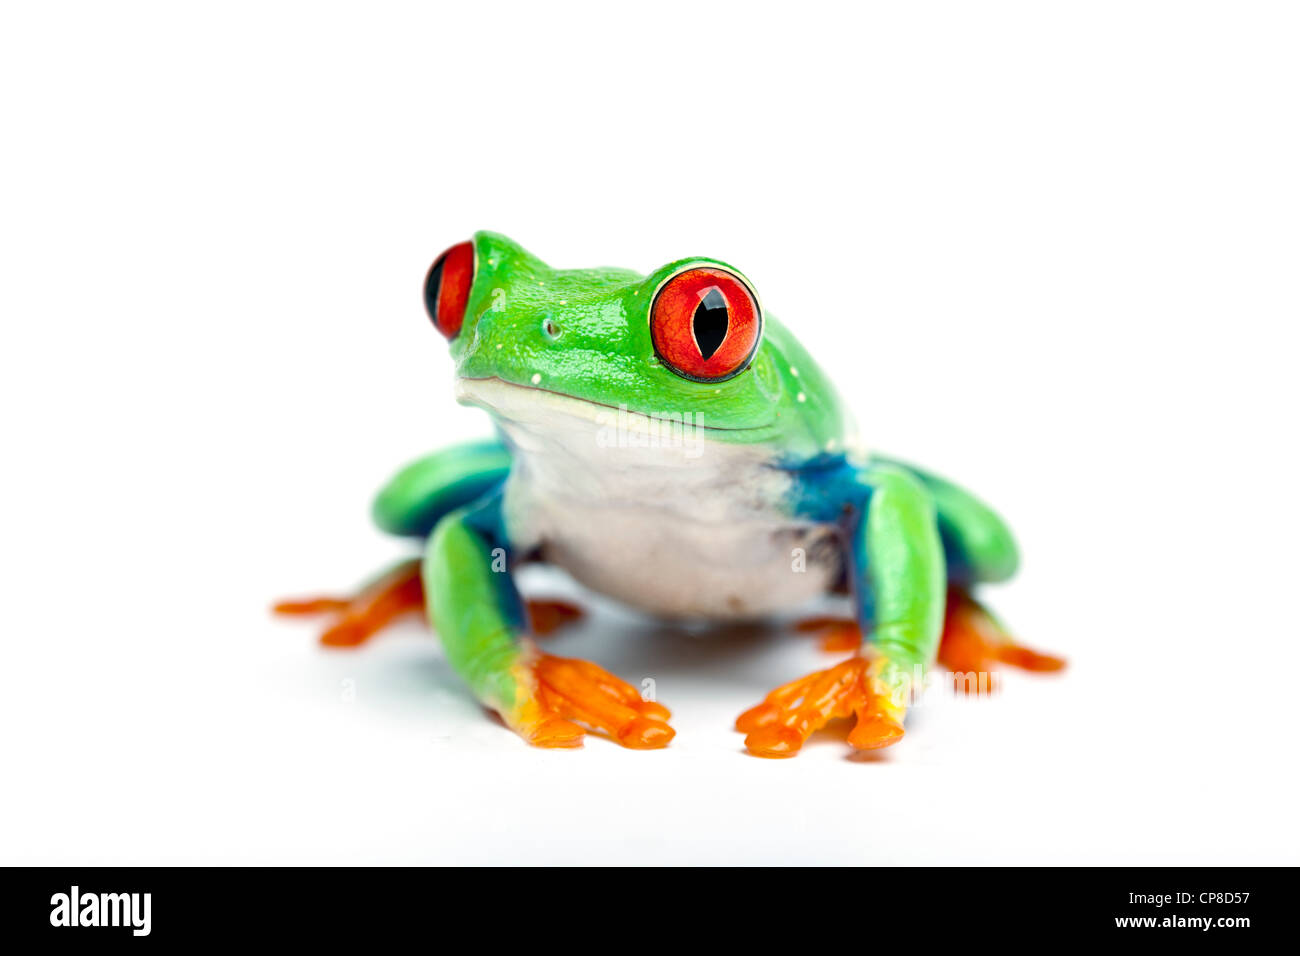 Red-eyed tree frog, ou, agalychnis callidryas, Costa Rica Banque D'Images